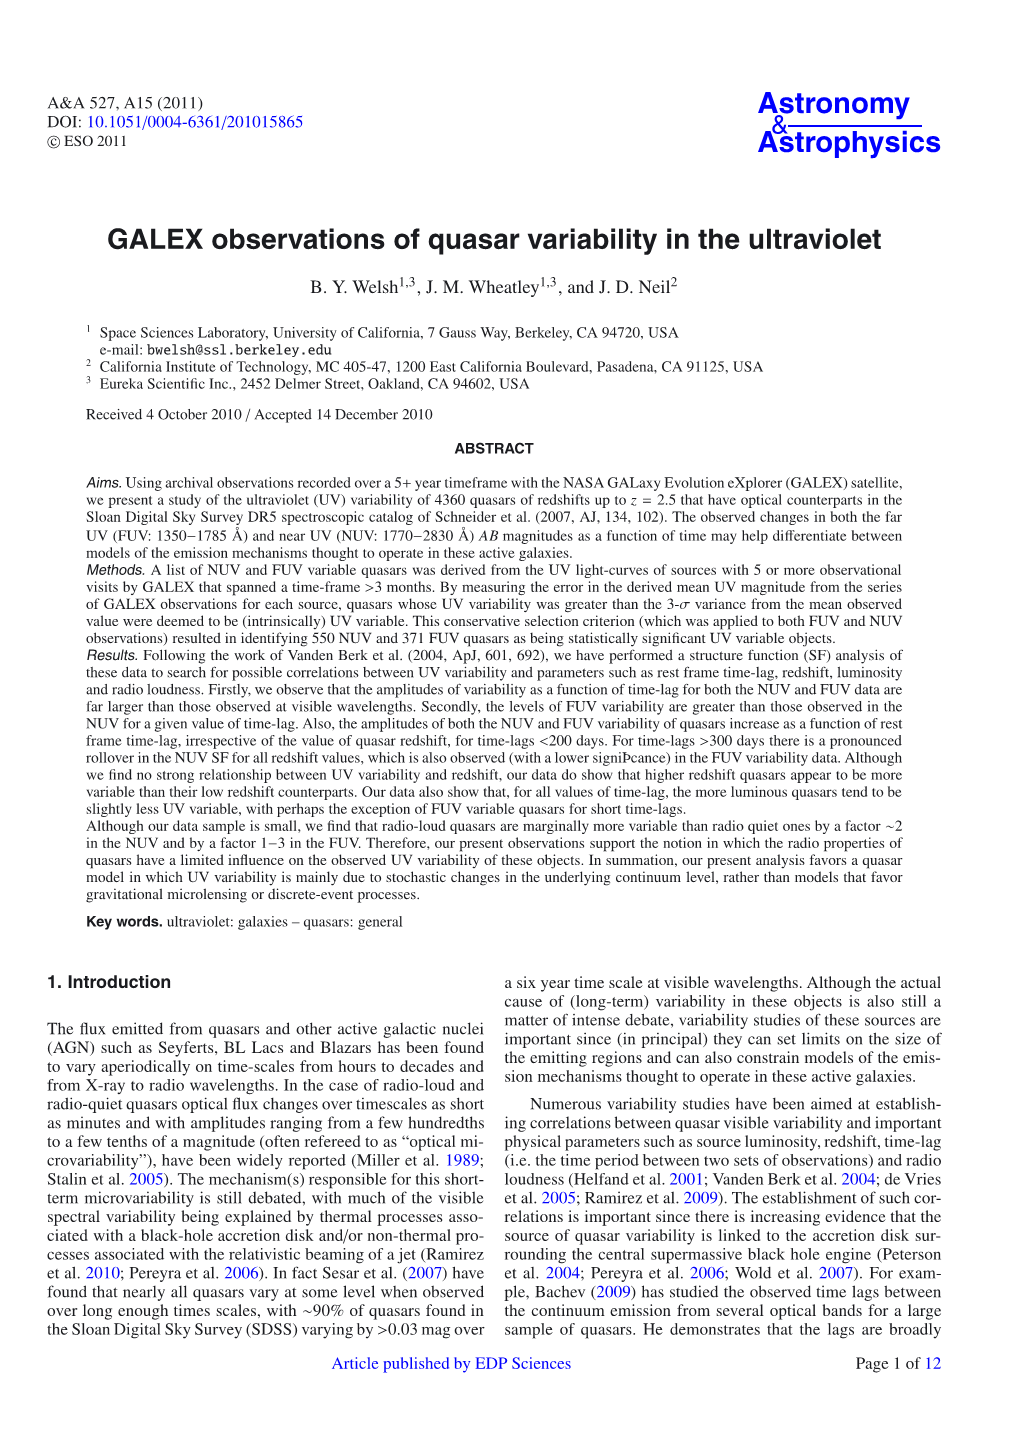 GALEX Observations of Quasar Variability in the Ultraviolet